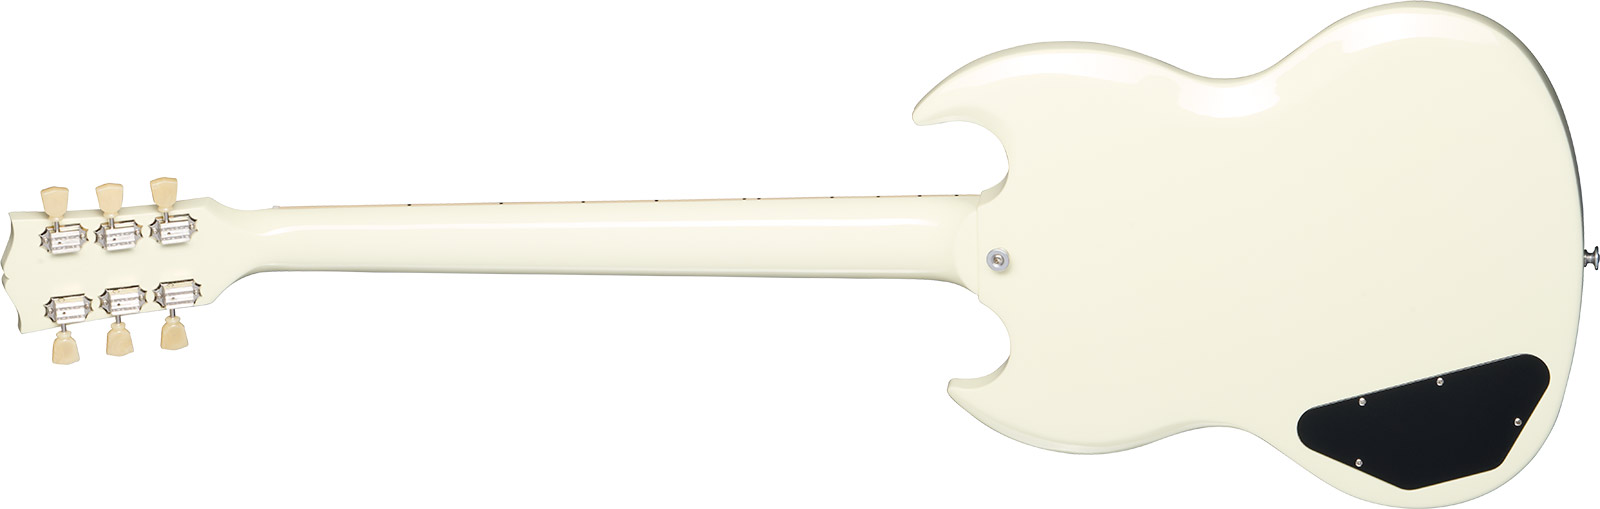 Gibson Sg Standard 1961 Custom Color 2h Ht Rw - Classic White - Double cut electric guitar - Variation 1